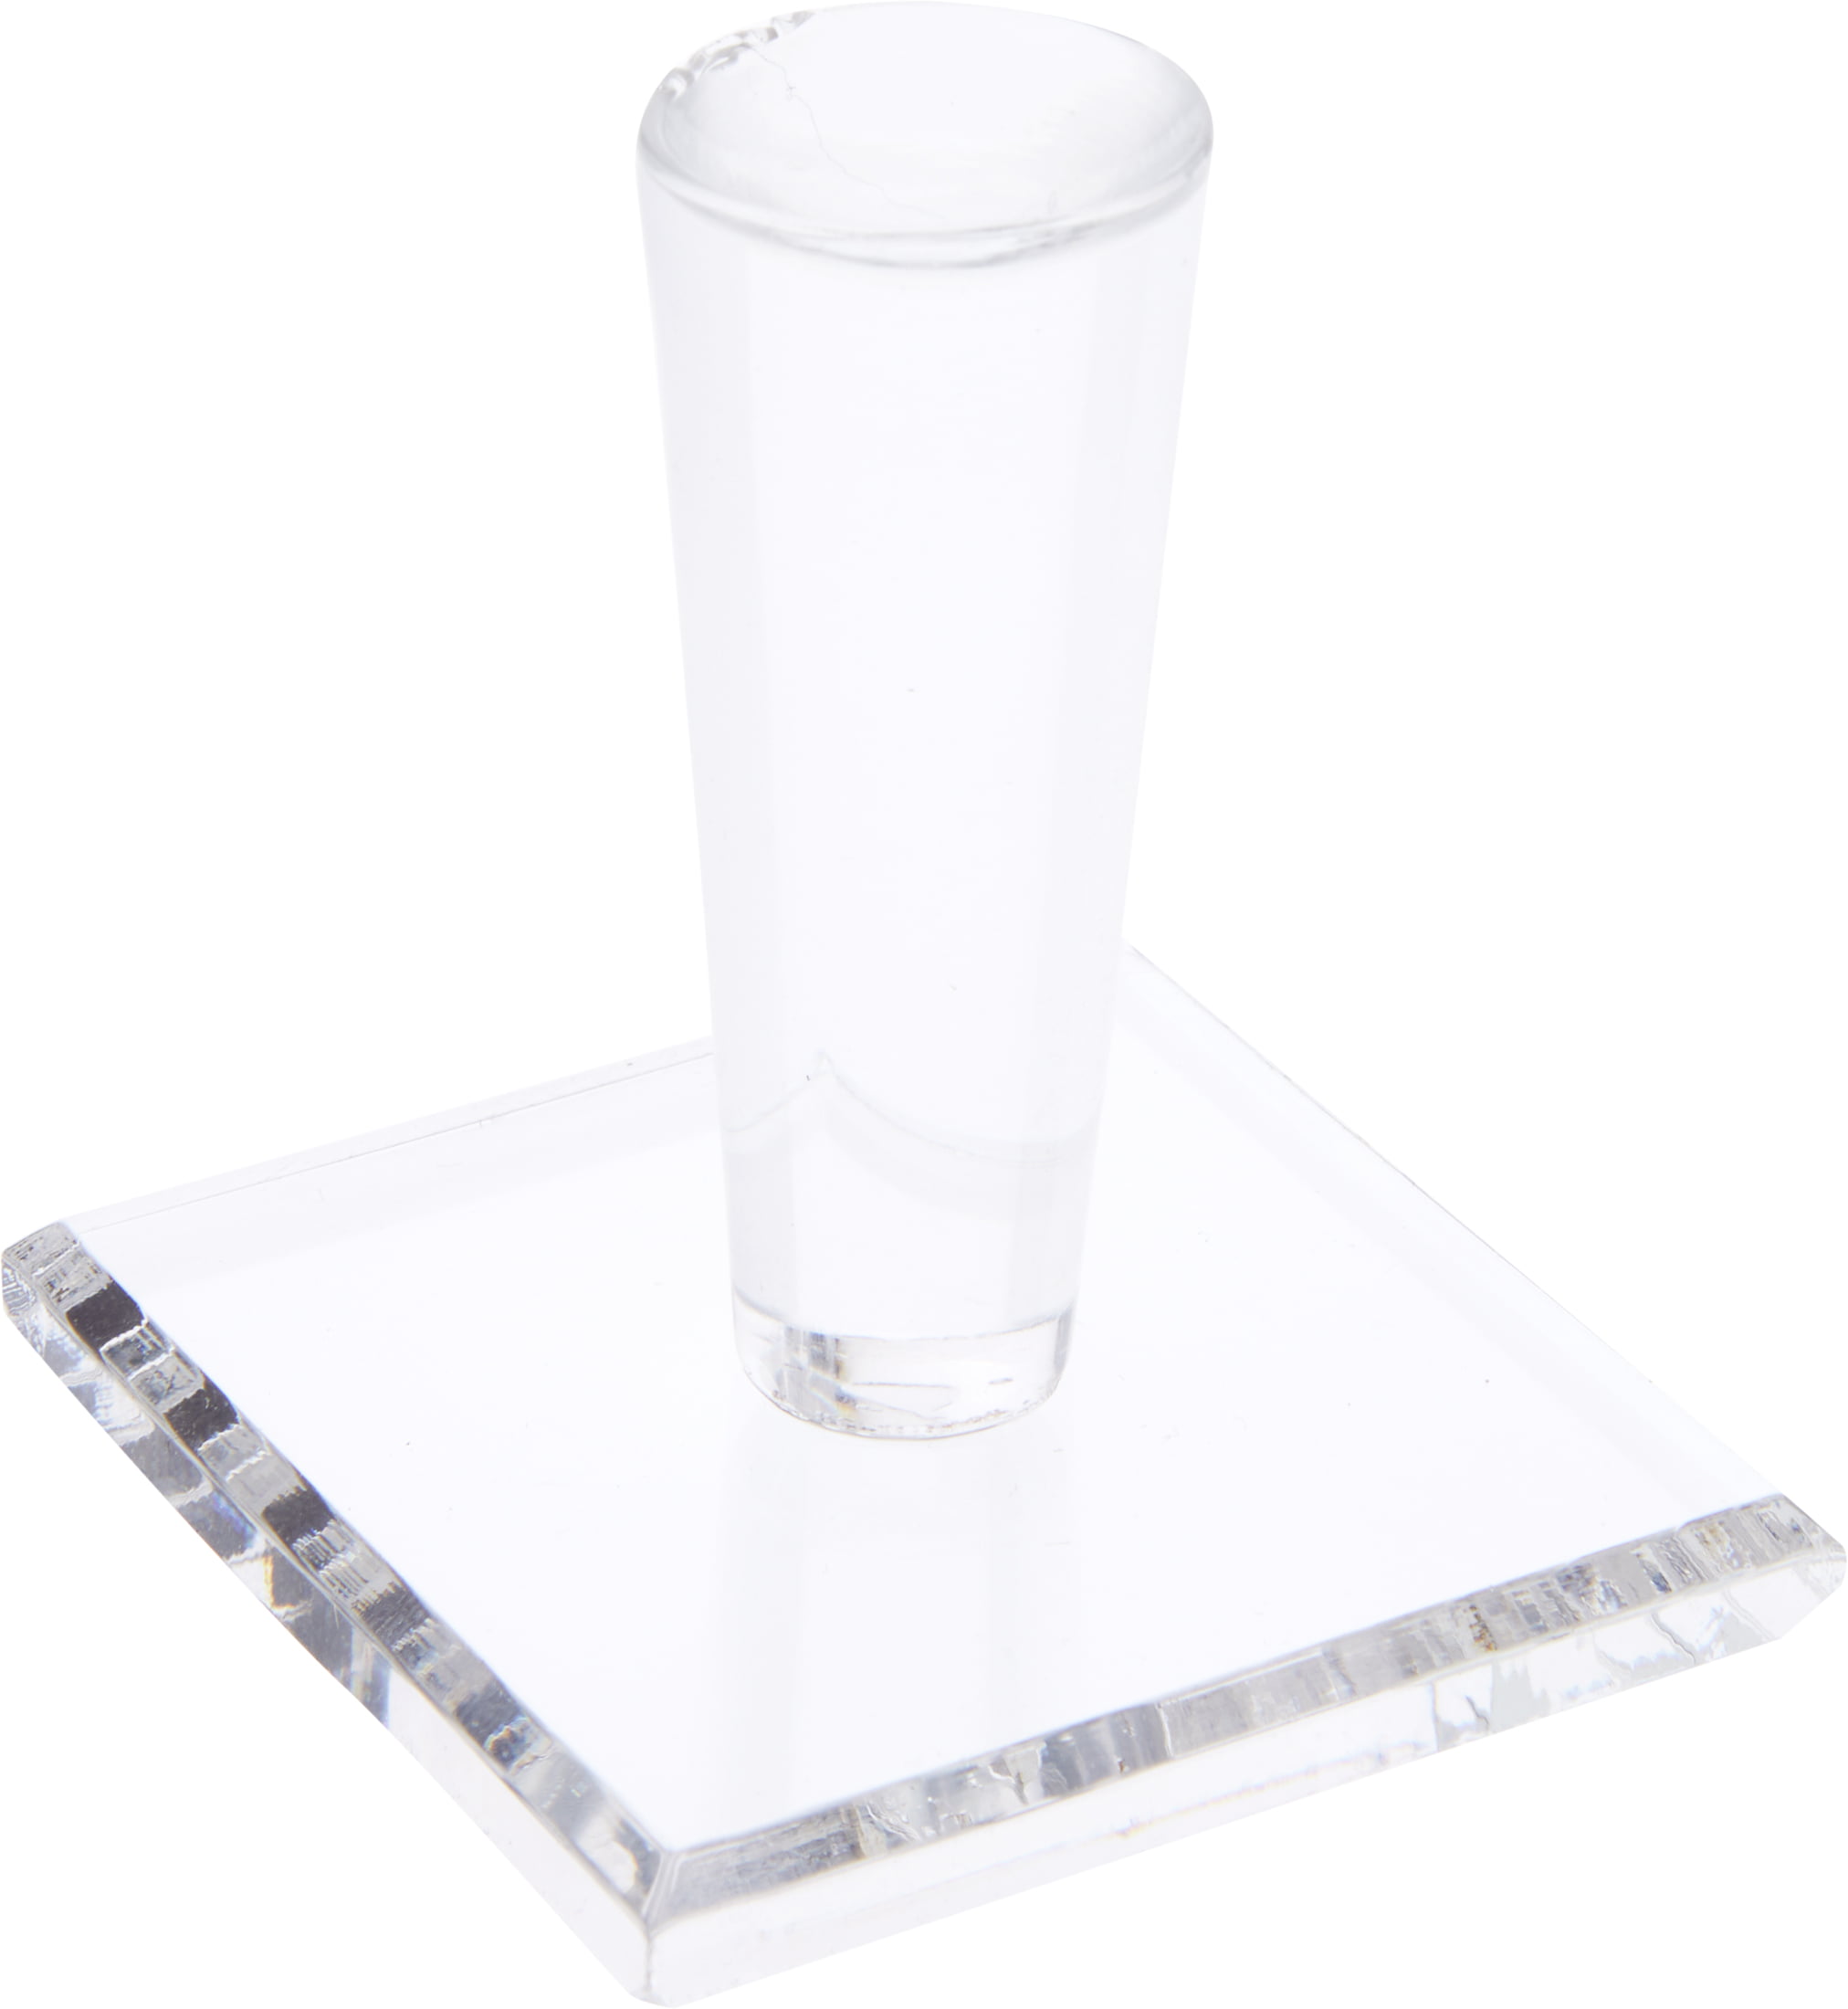 Plymor Clear Acrylic Round Cylinder Display Riser 2" H x 5" D 